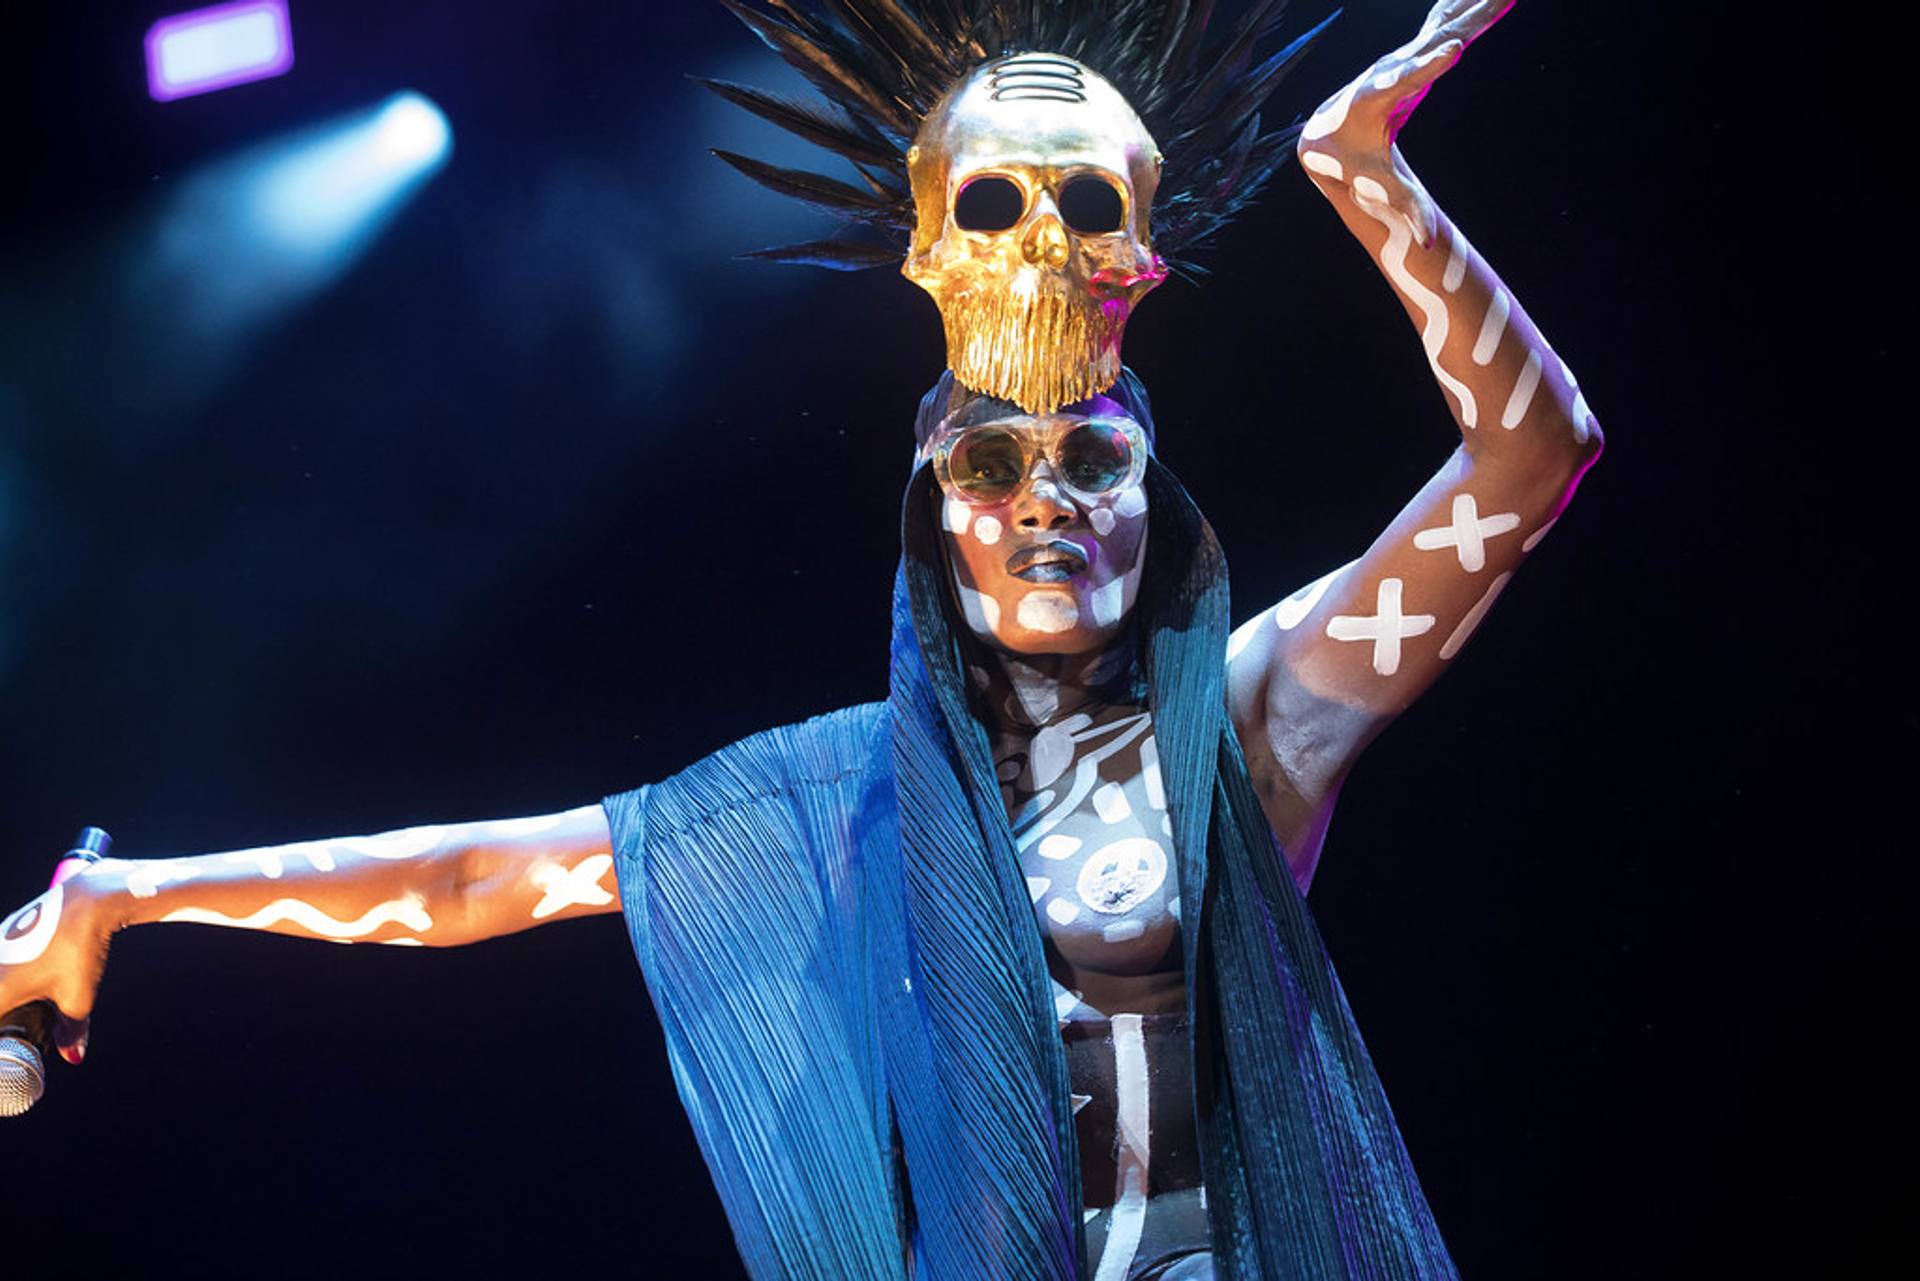 An image of performer Grace Jones on stage, wearing a golden skull atop her head. He is wearing sunglasses and glaring at the camera.